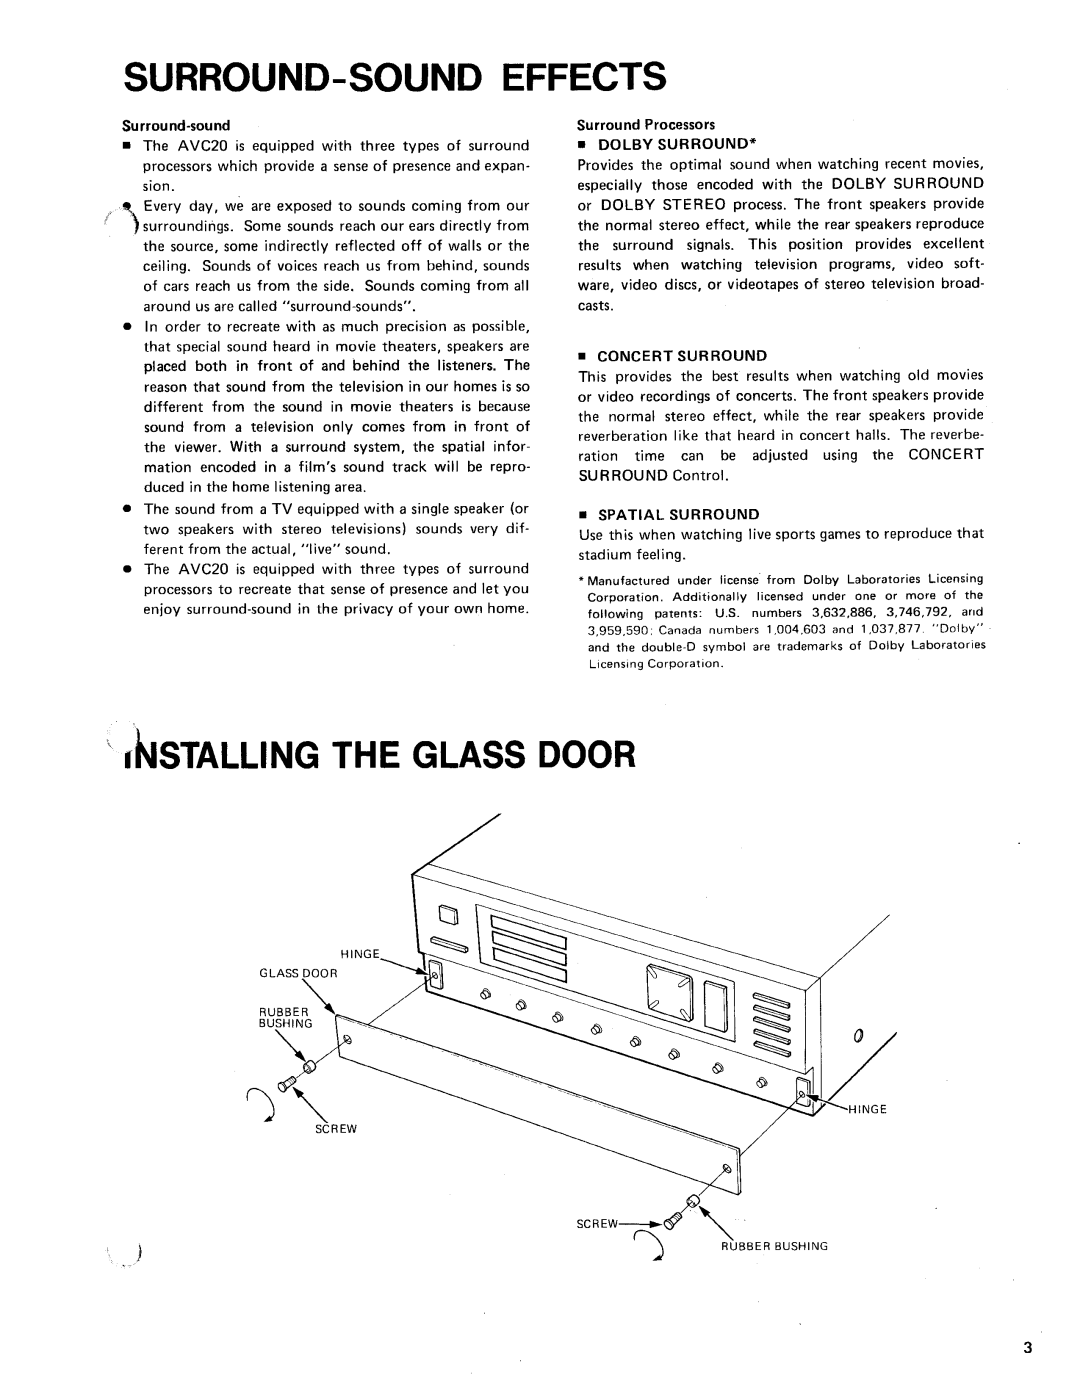 Shure AVC20 owner manual S Stalling The Glass Door, Surround-Sound Effects 